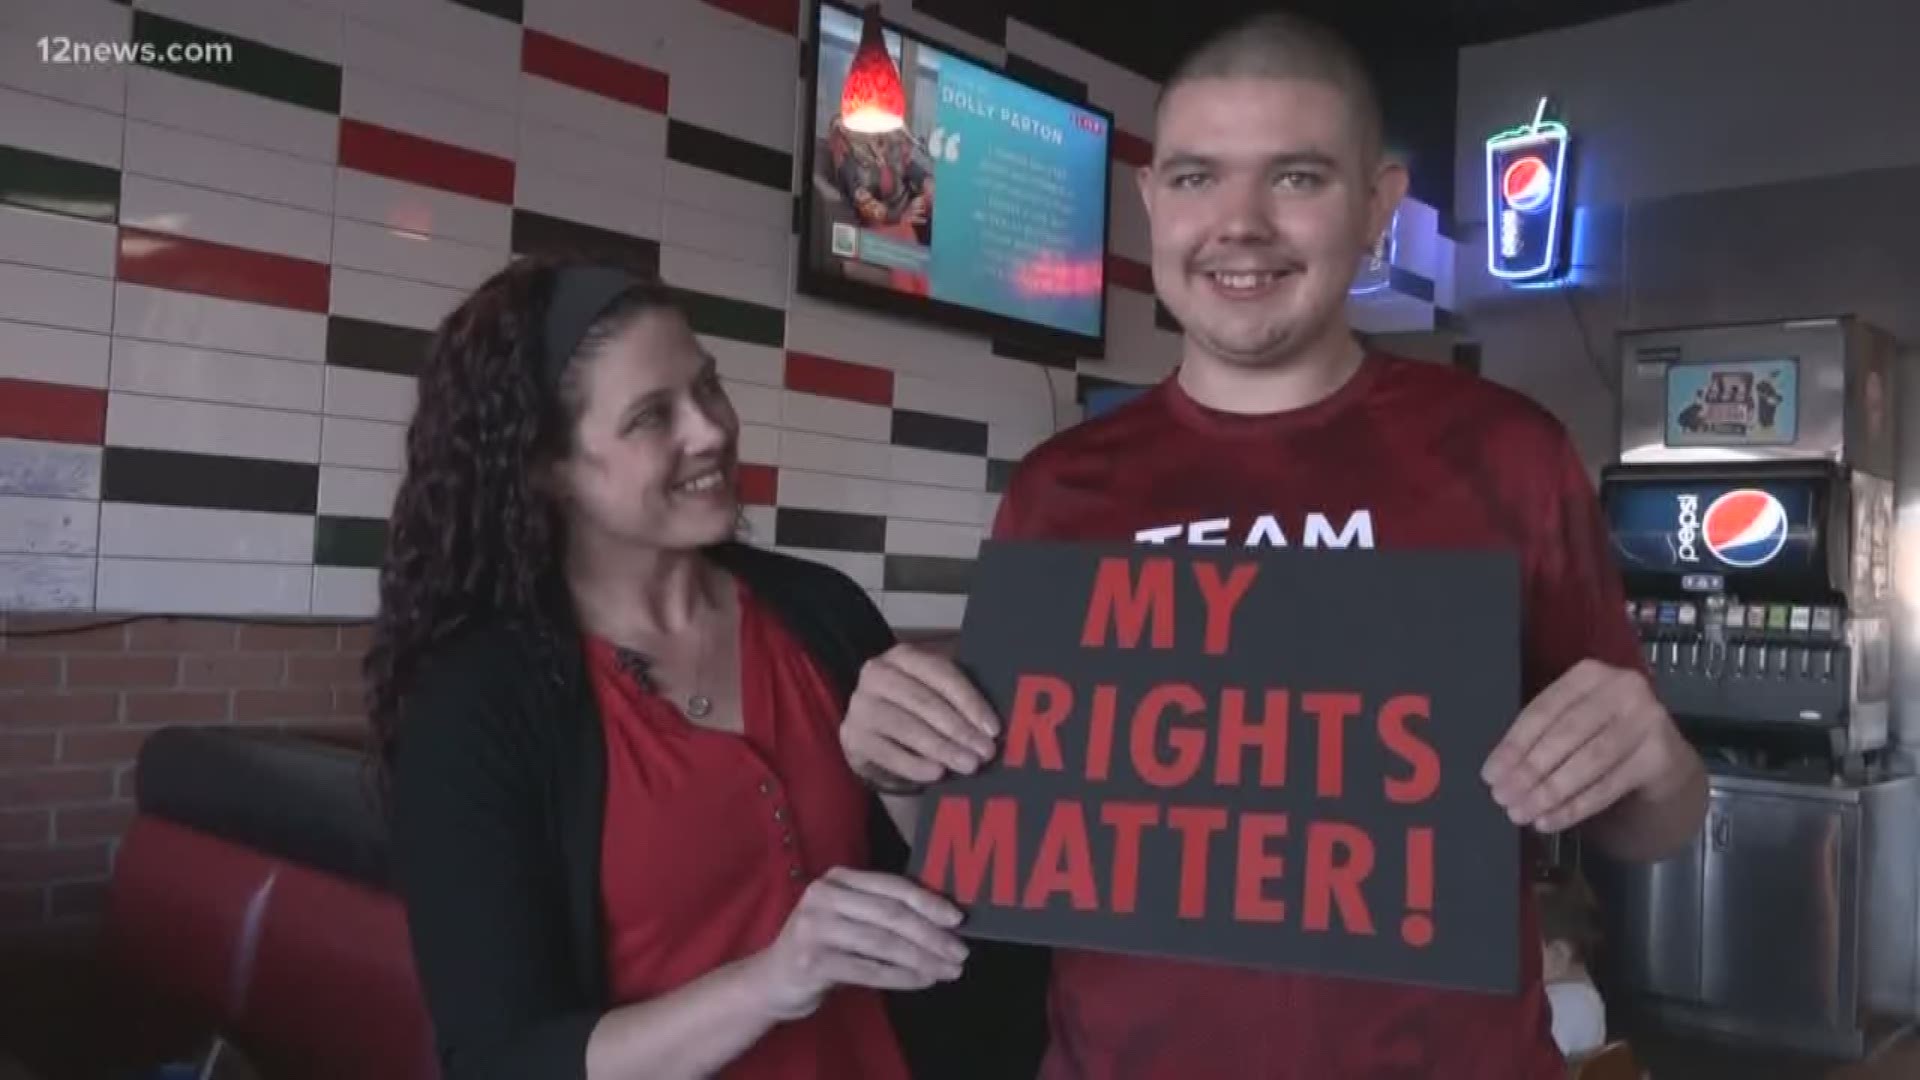 Jordan is a student at Mountain Pointe High School in Ahwatukee, and he happens to be disabled. A group of kids at the school followed him into a bathroom and recorded him. Now, Jordan's mom is helping her son speak out for his rights.